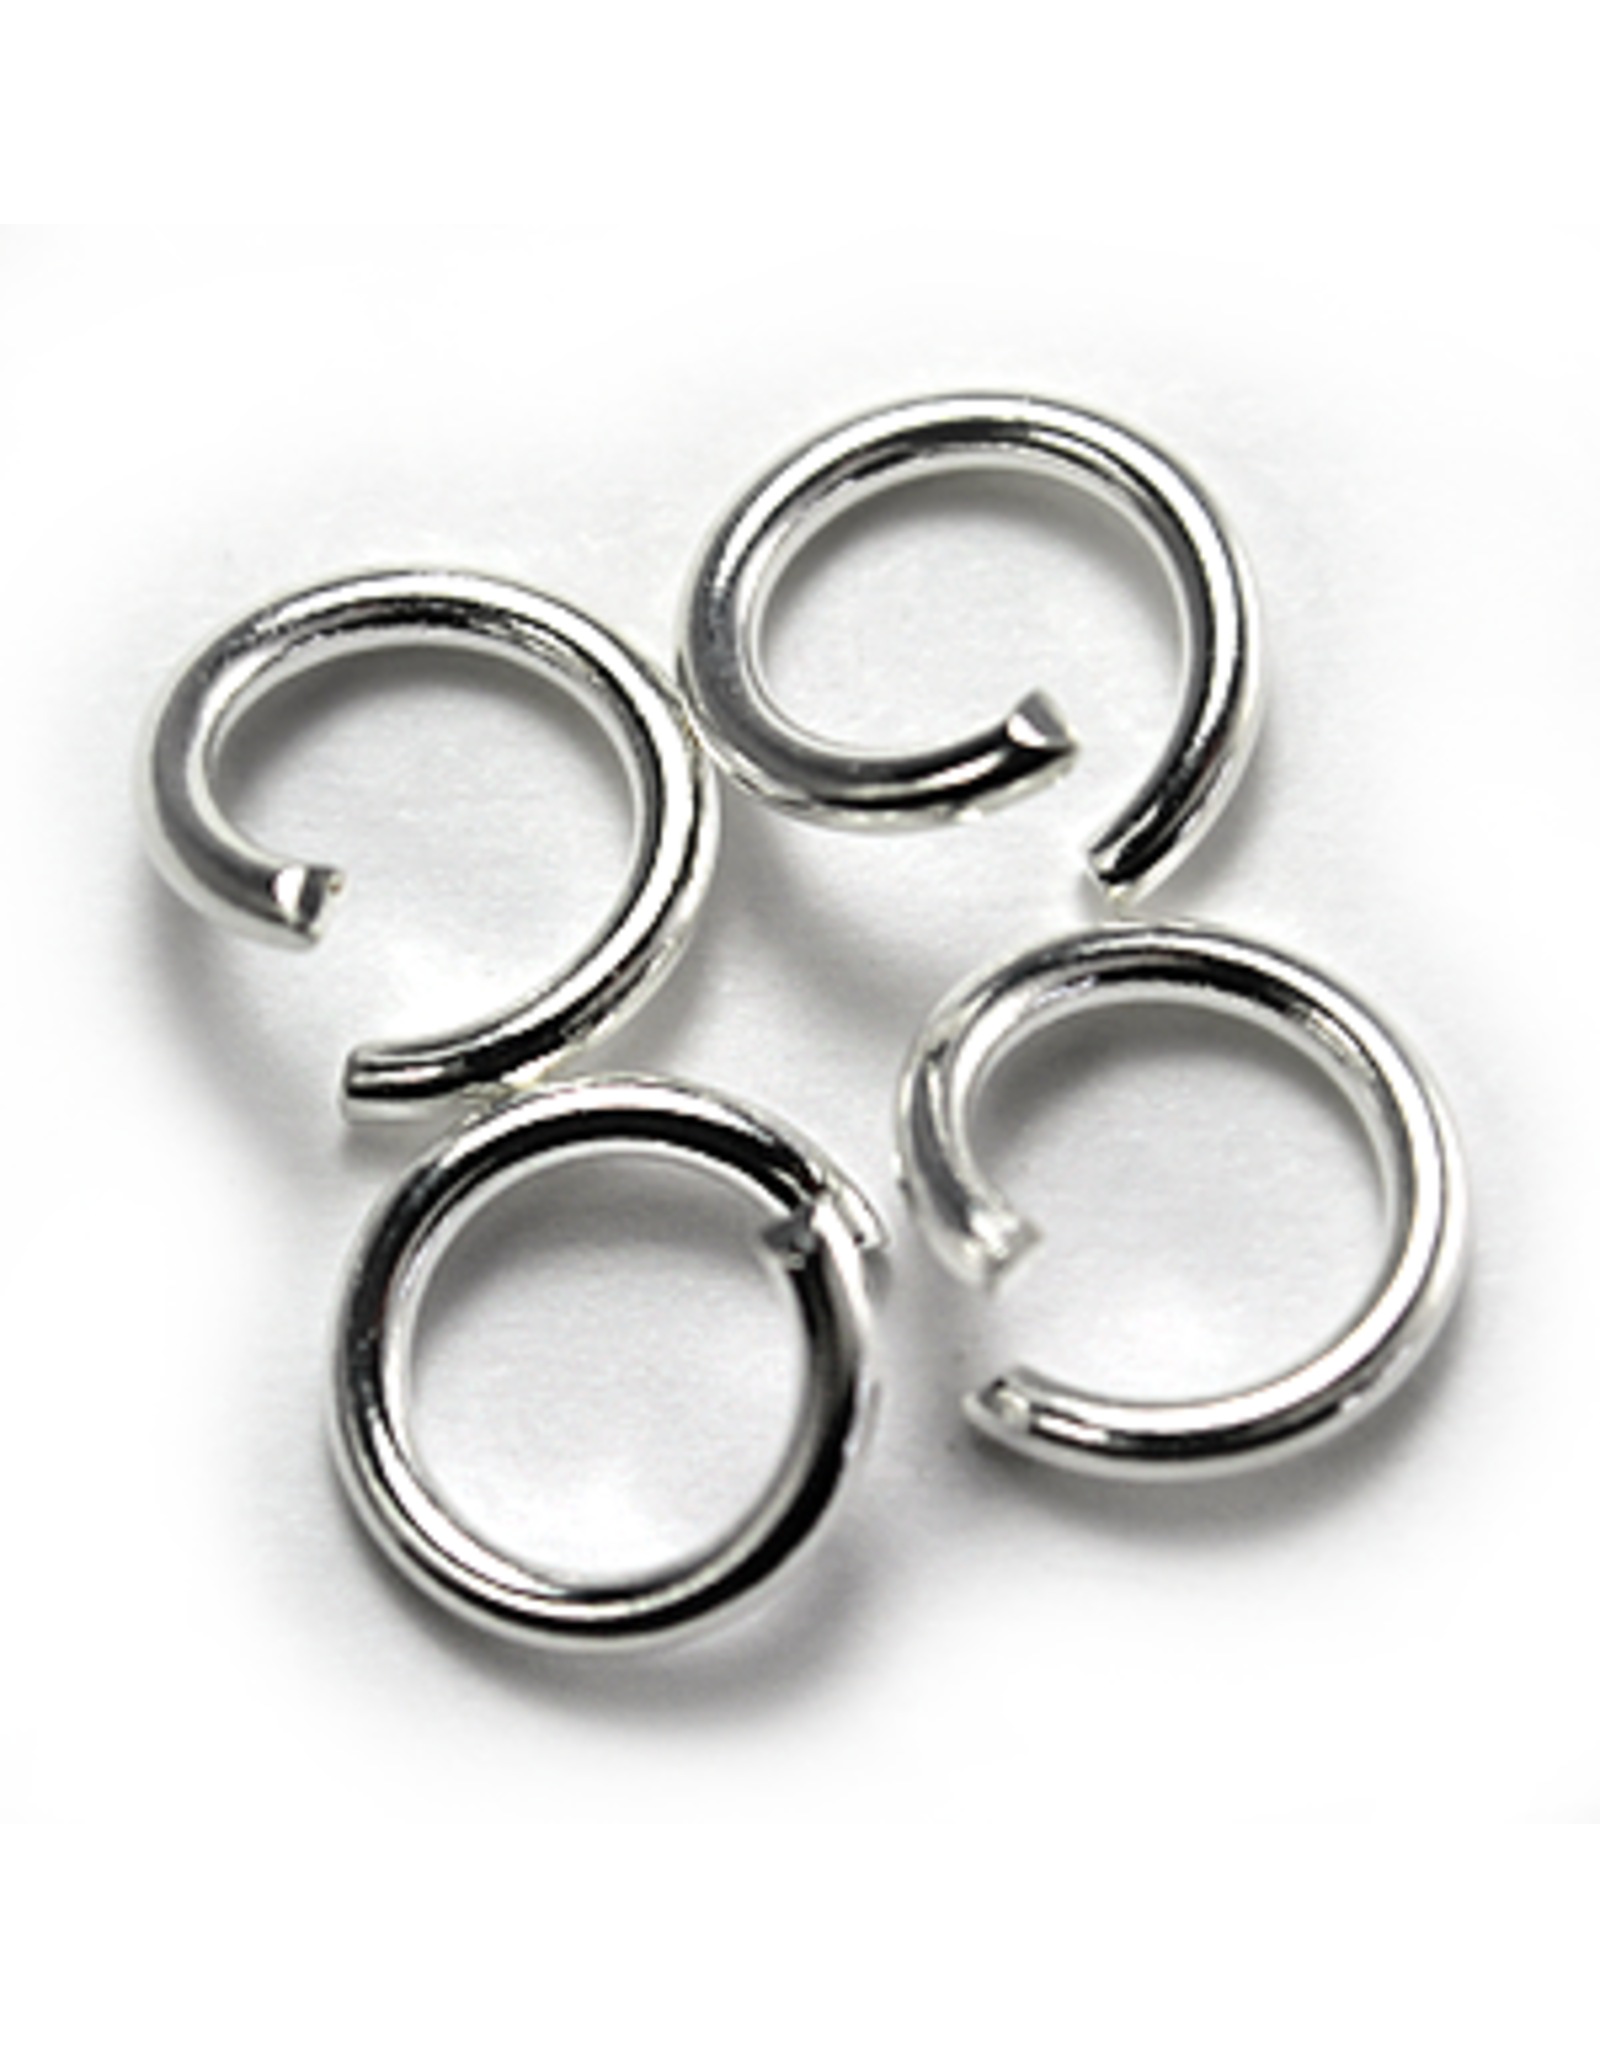 Jump Ring 8mm Silver  approx 16g  x50 NF